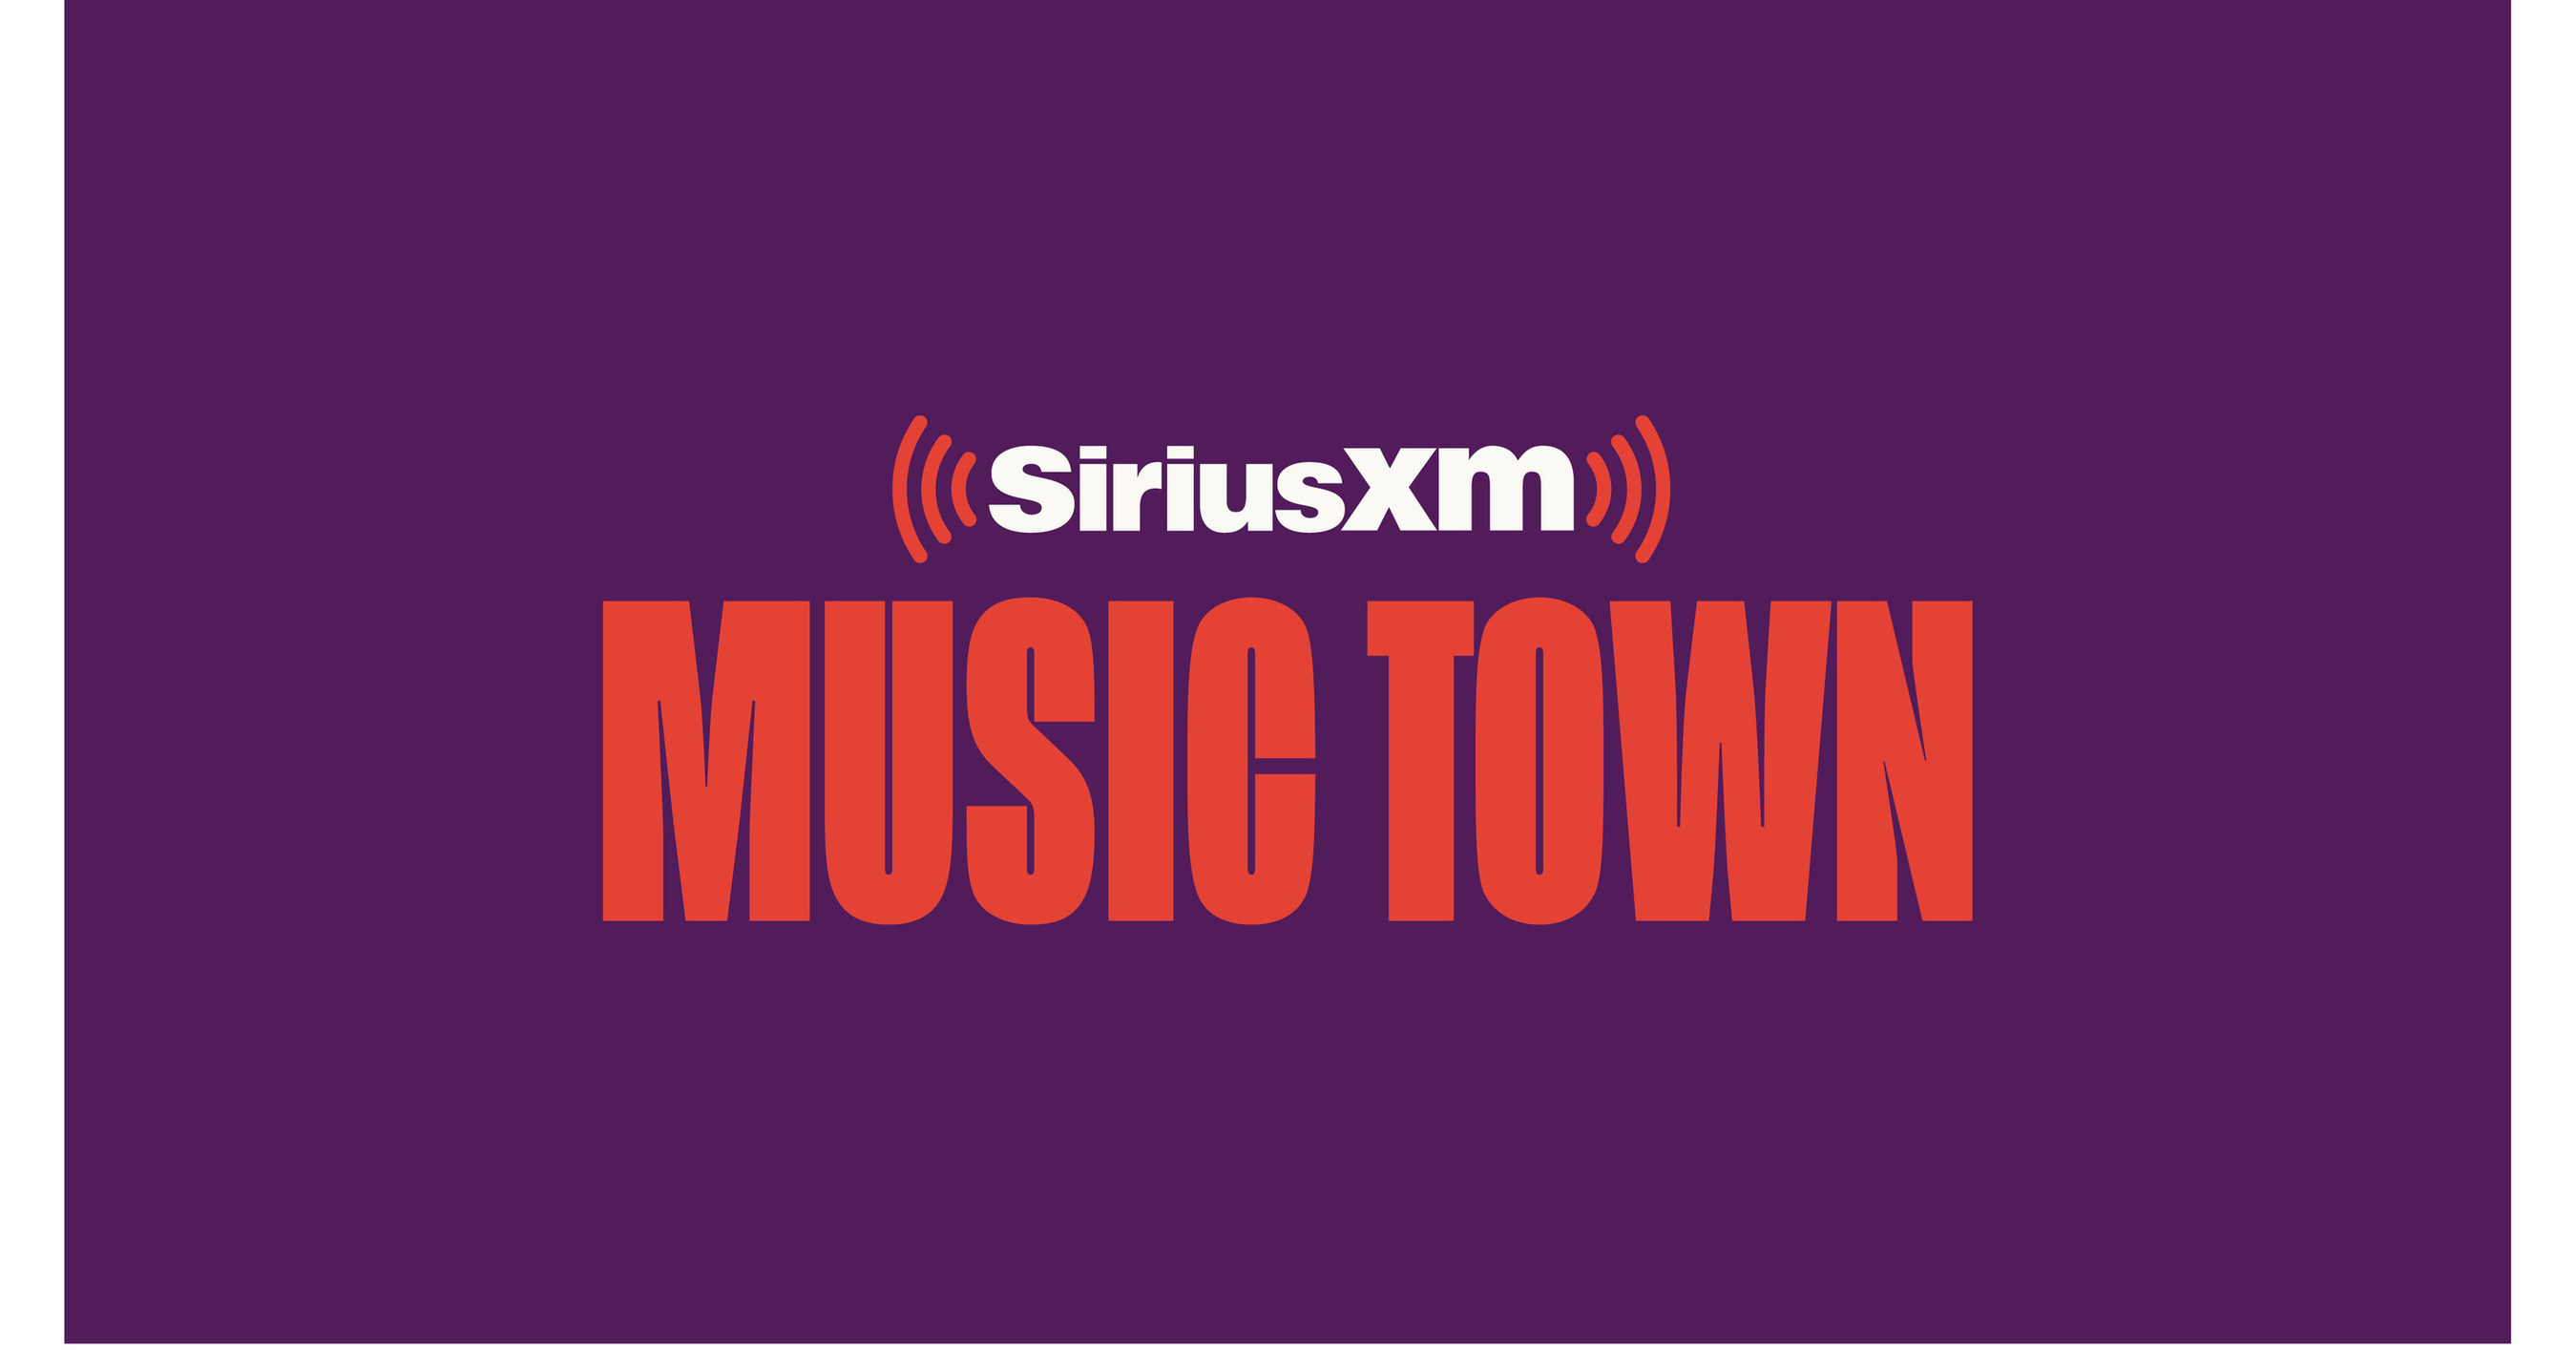 SiriusXM announces Top 16 communities in nationwide Music Town search